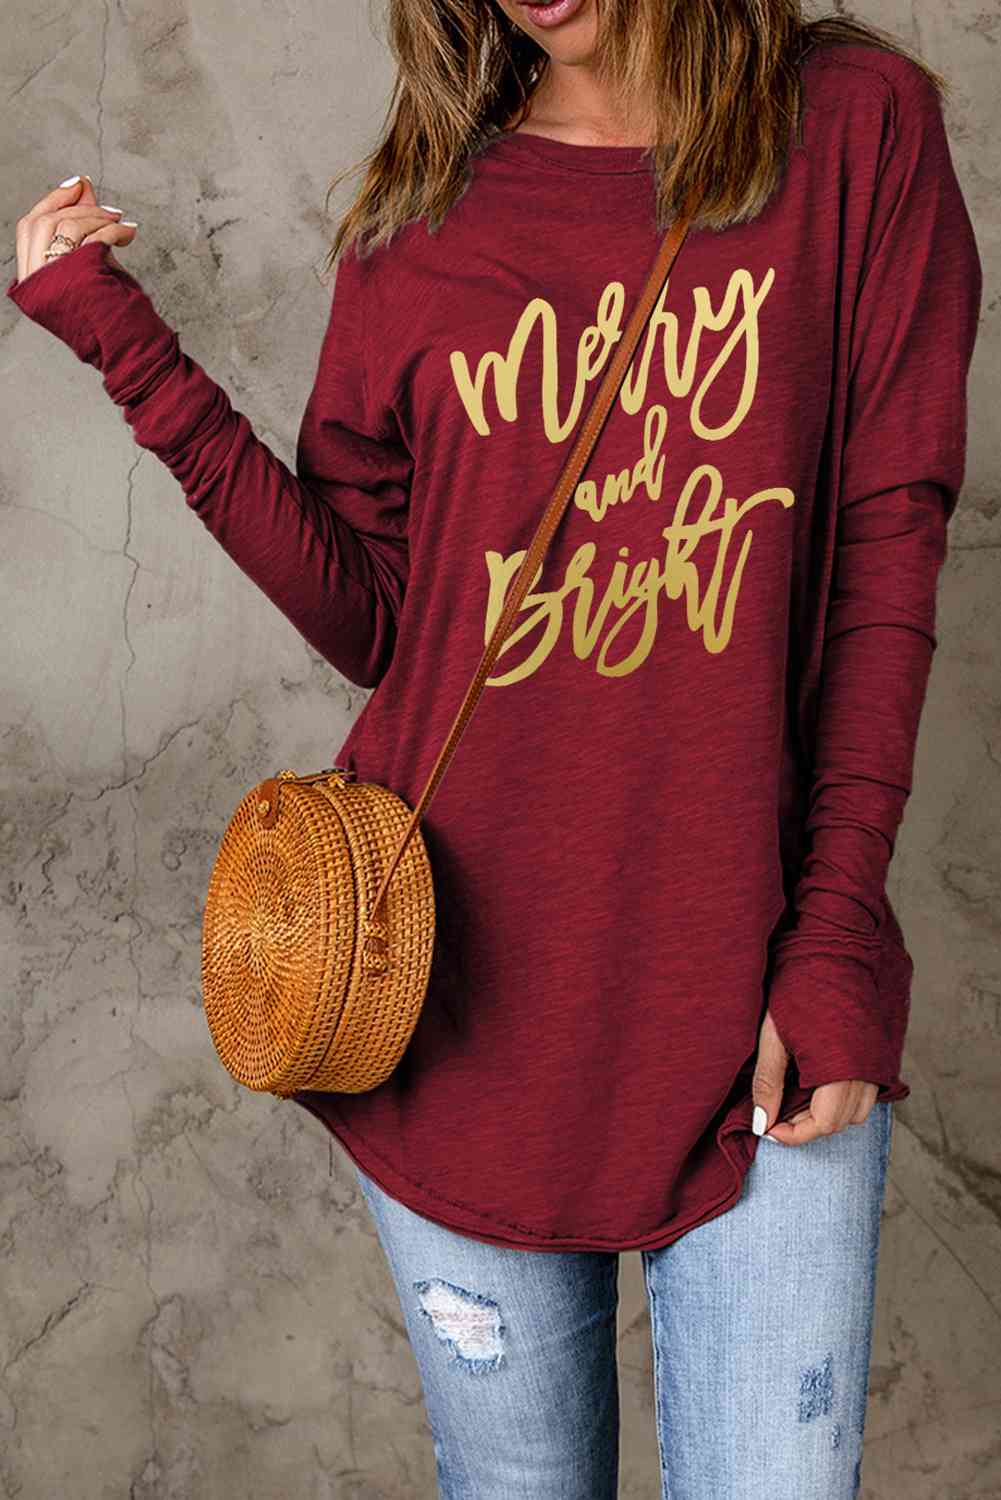 MERRY AND BRIGHT Christmas Graphic Long Sleeve T-Shirt